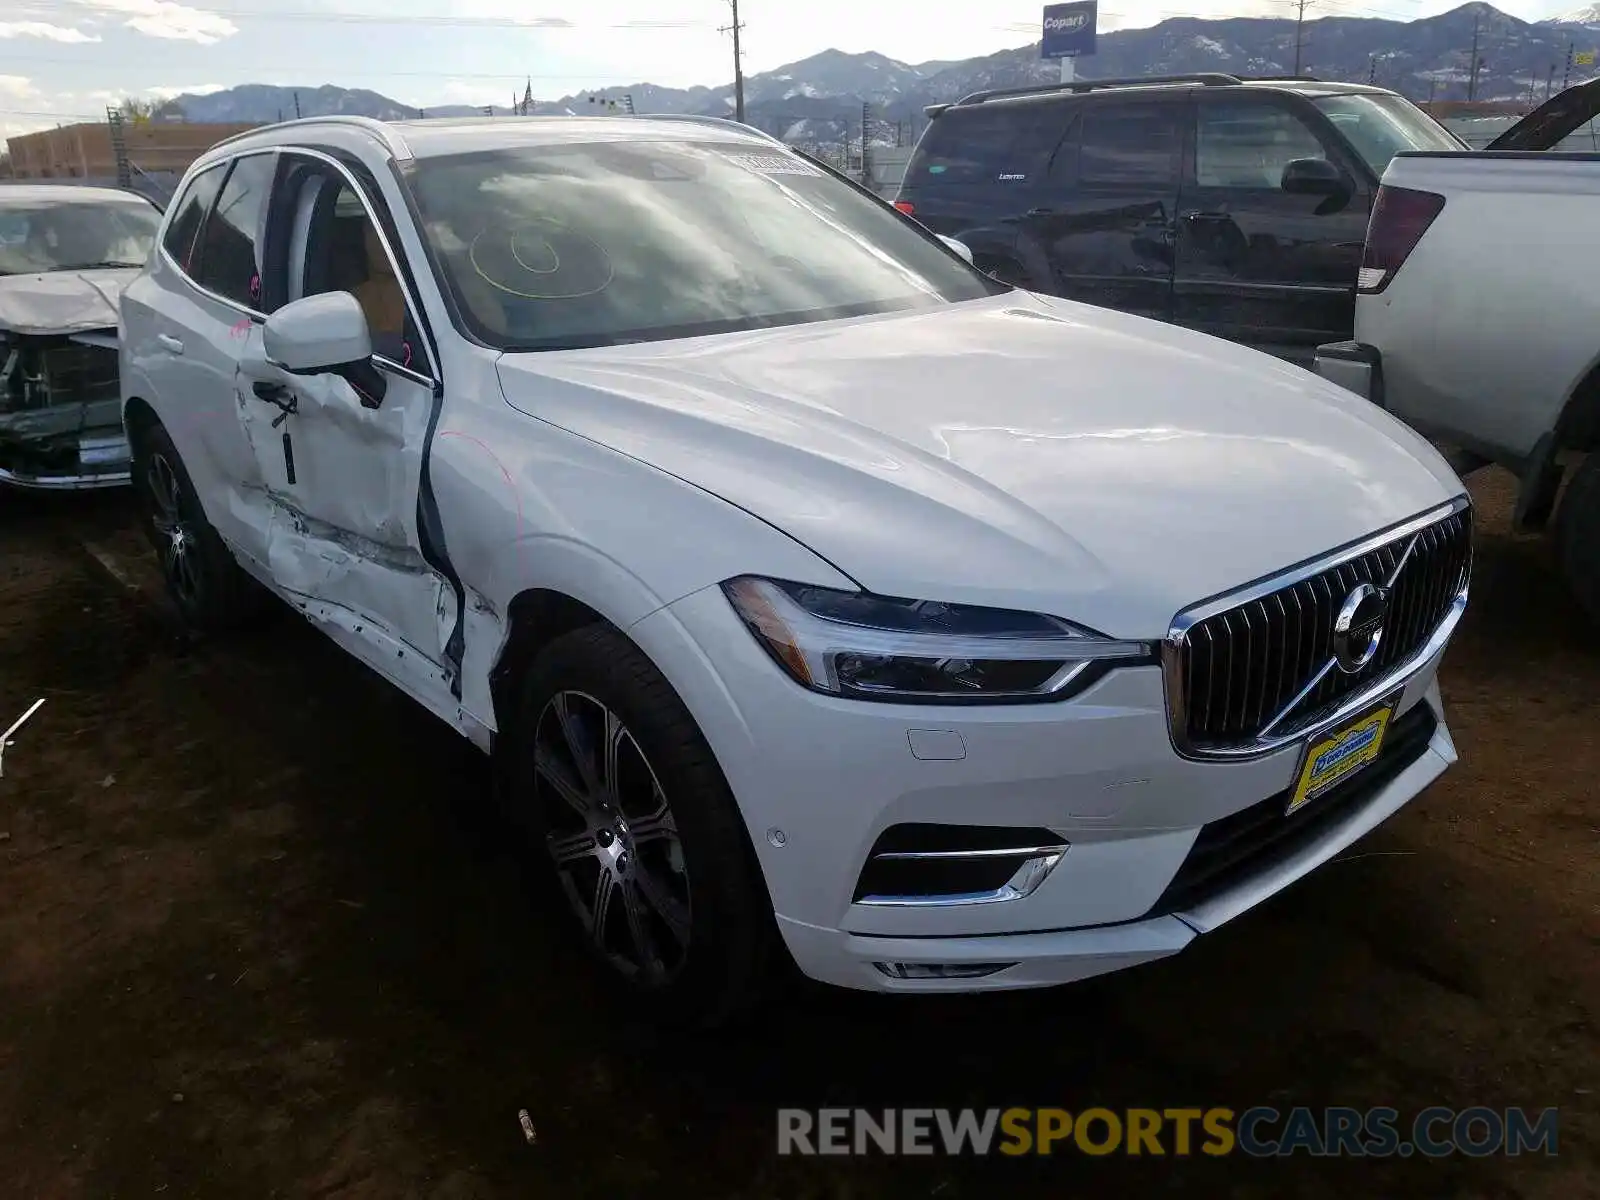 1 Photograph of a damaged car YV4102RL3L1465297 VOLVO XC60 T5 IN 2020